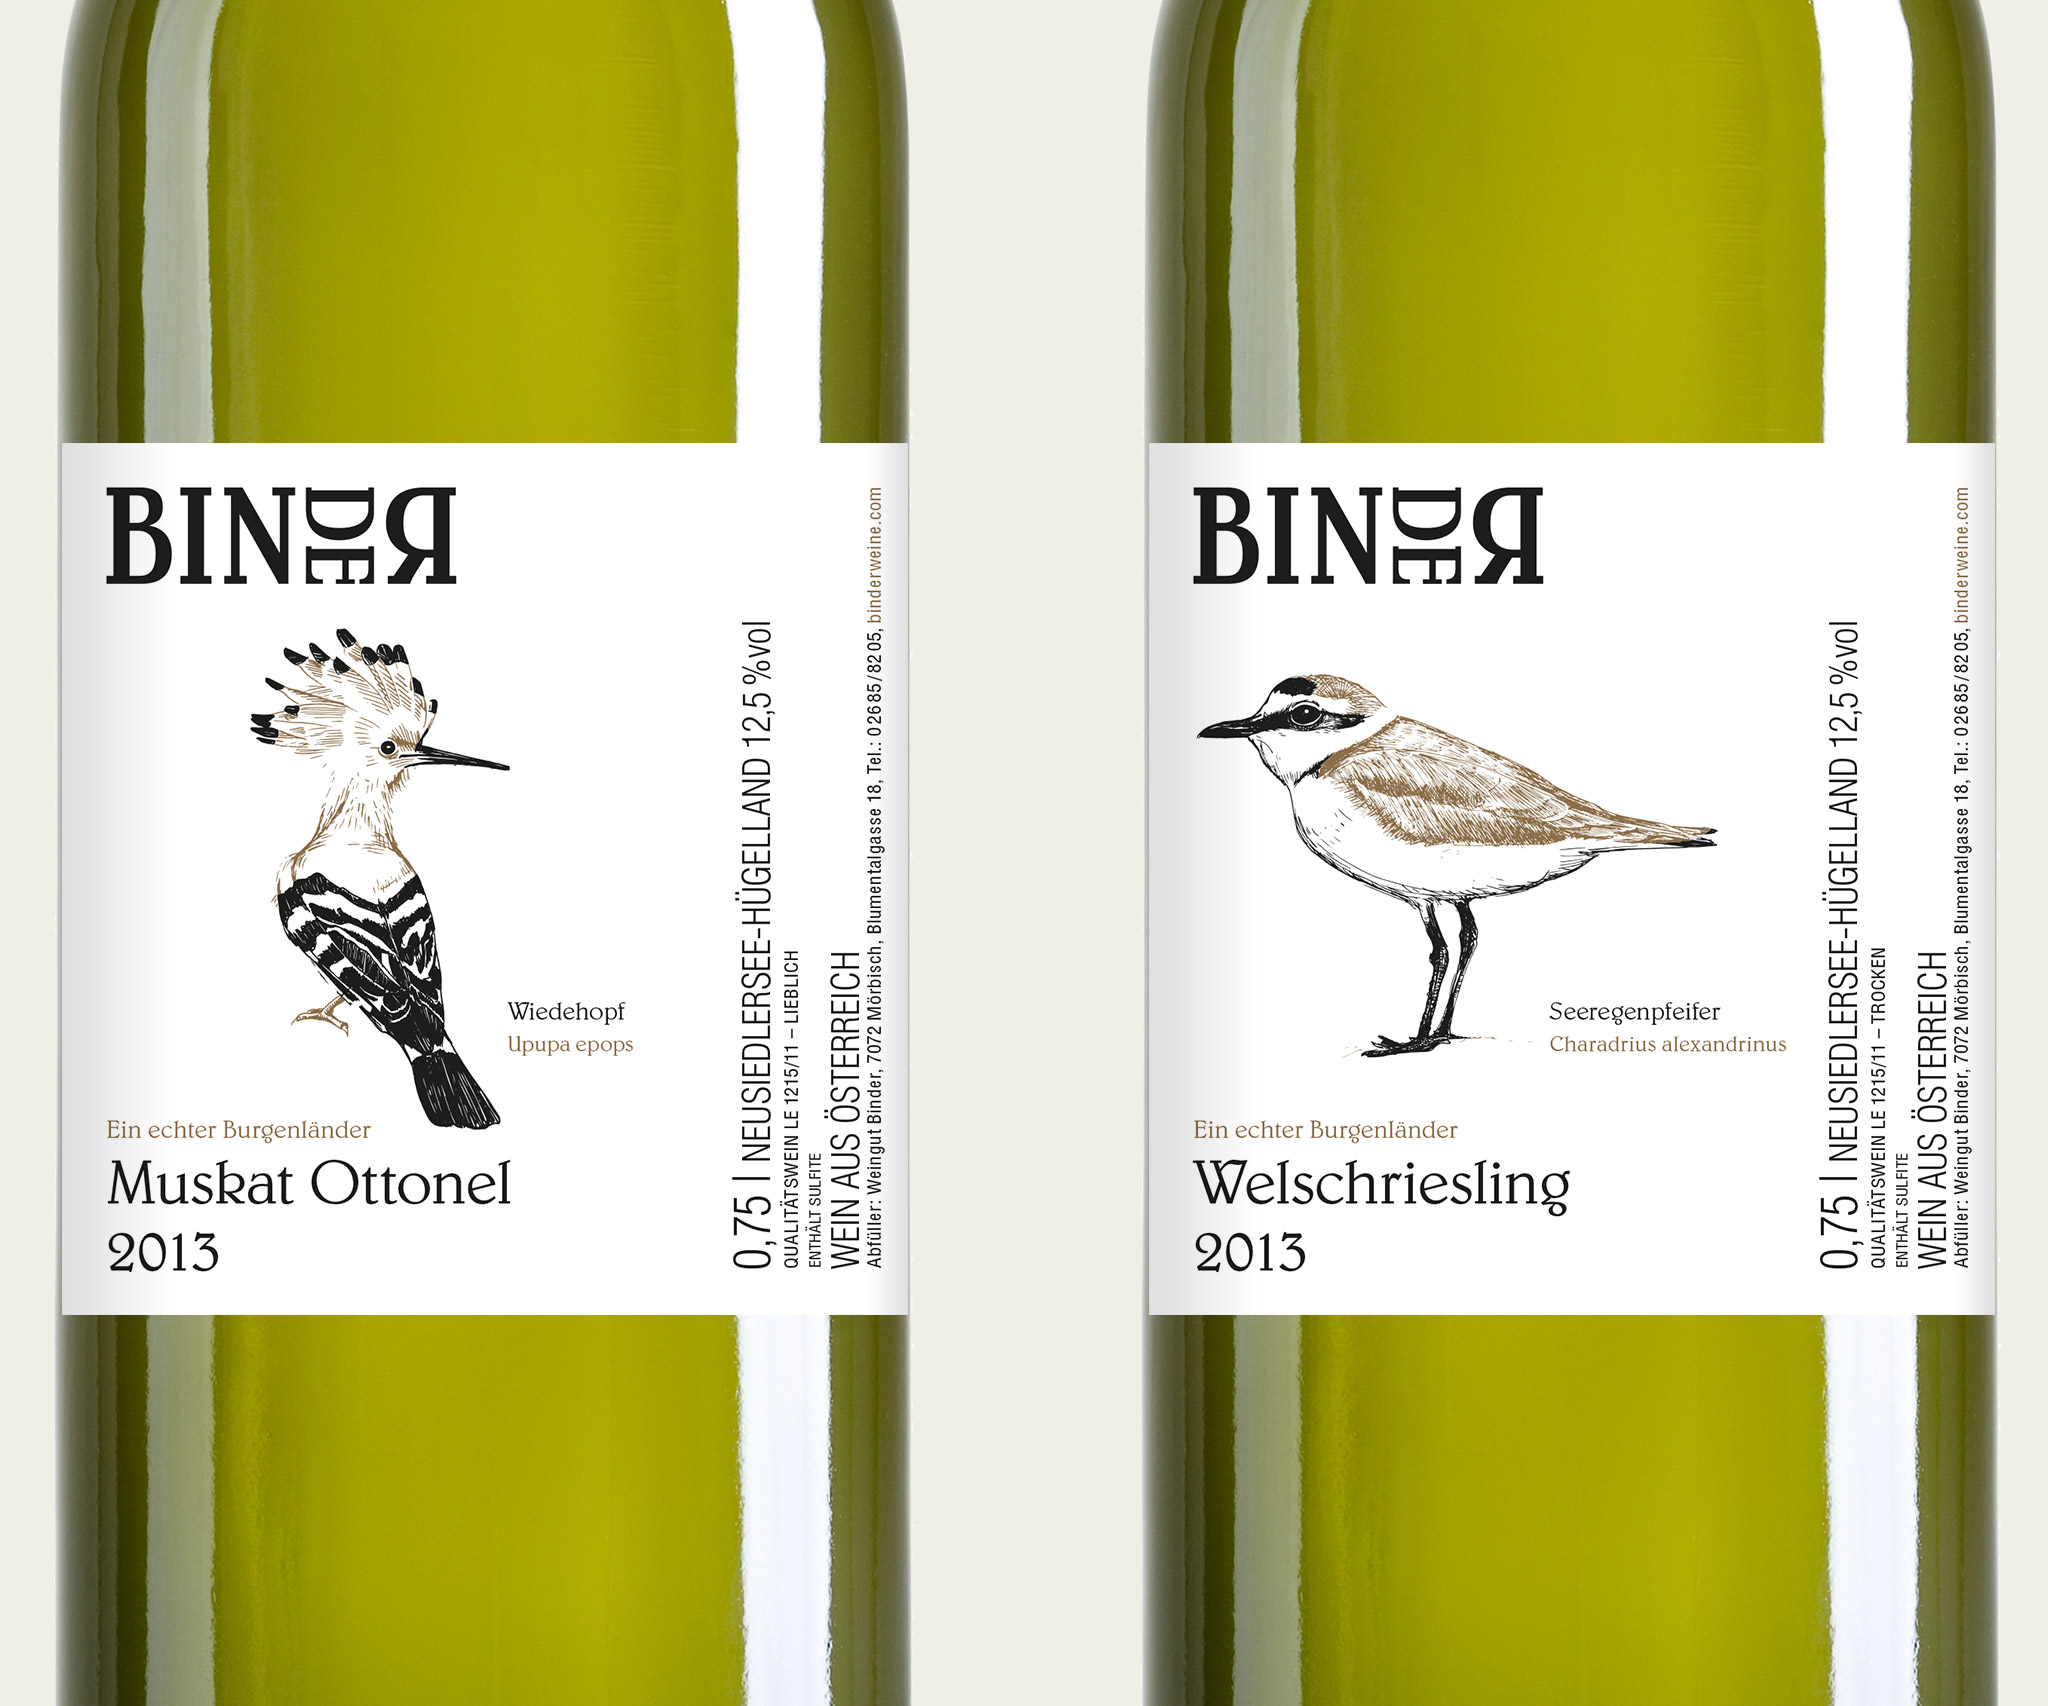 Binder winery labels with bird drawings